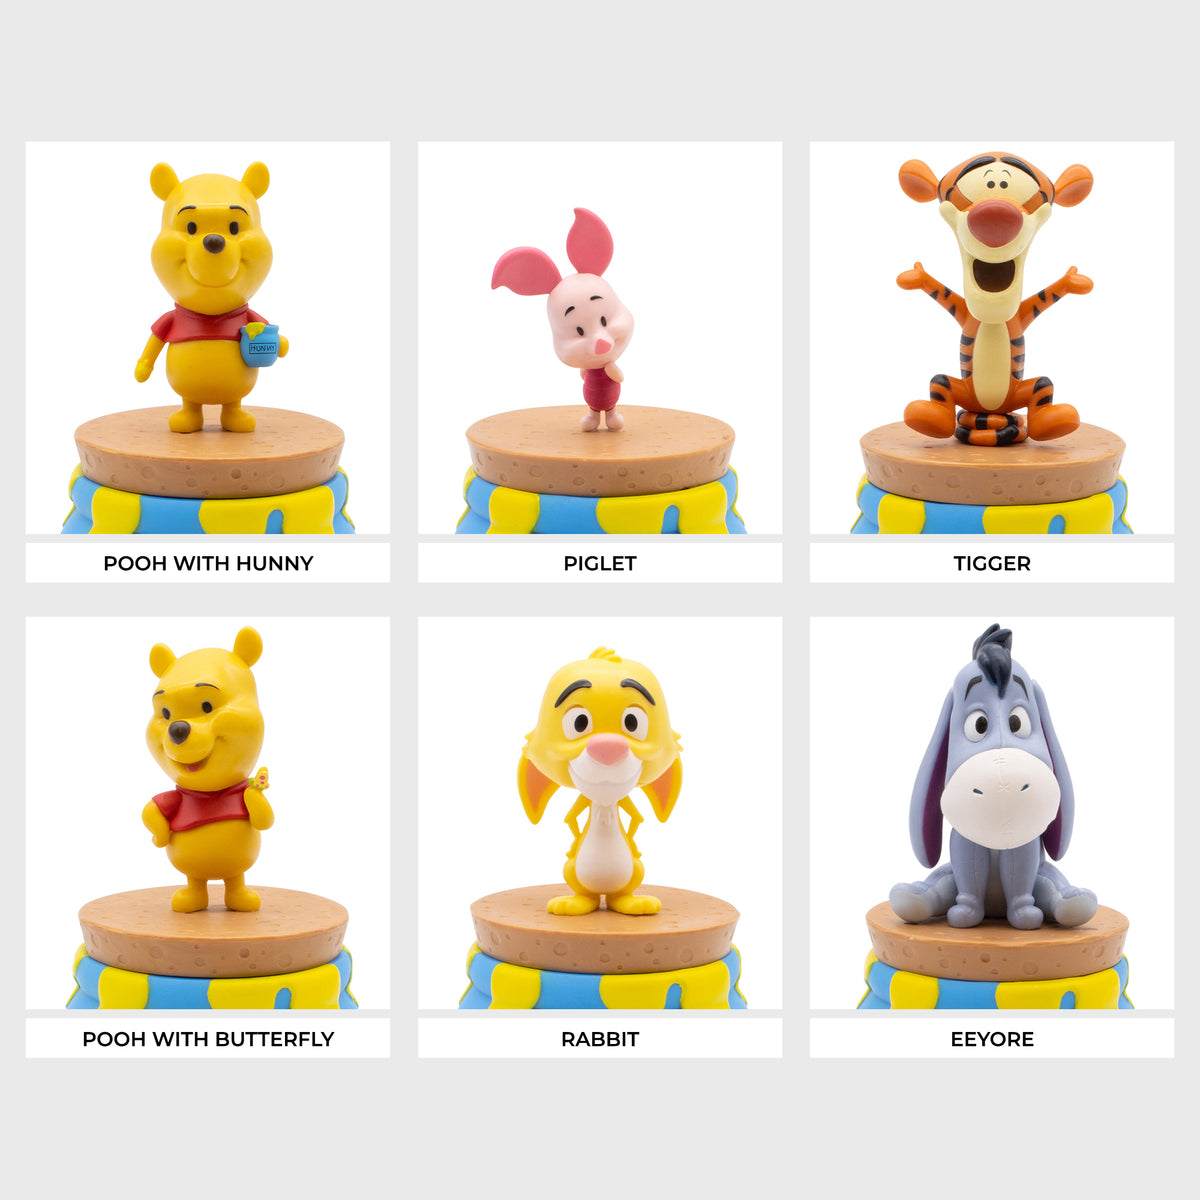 Disney's Winnie-the-Pooh - Blind Collectible Figures | CultureFly